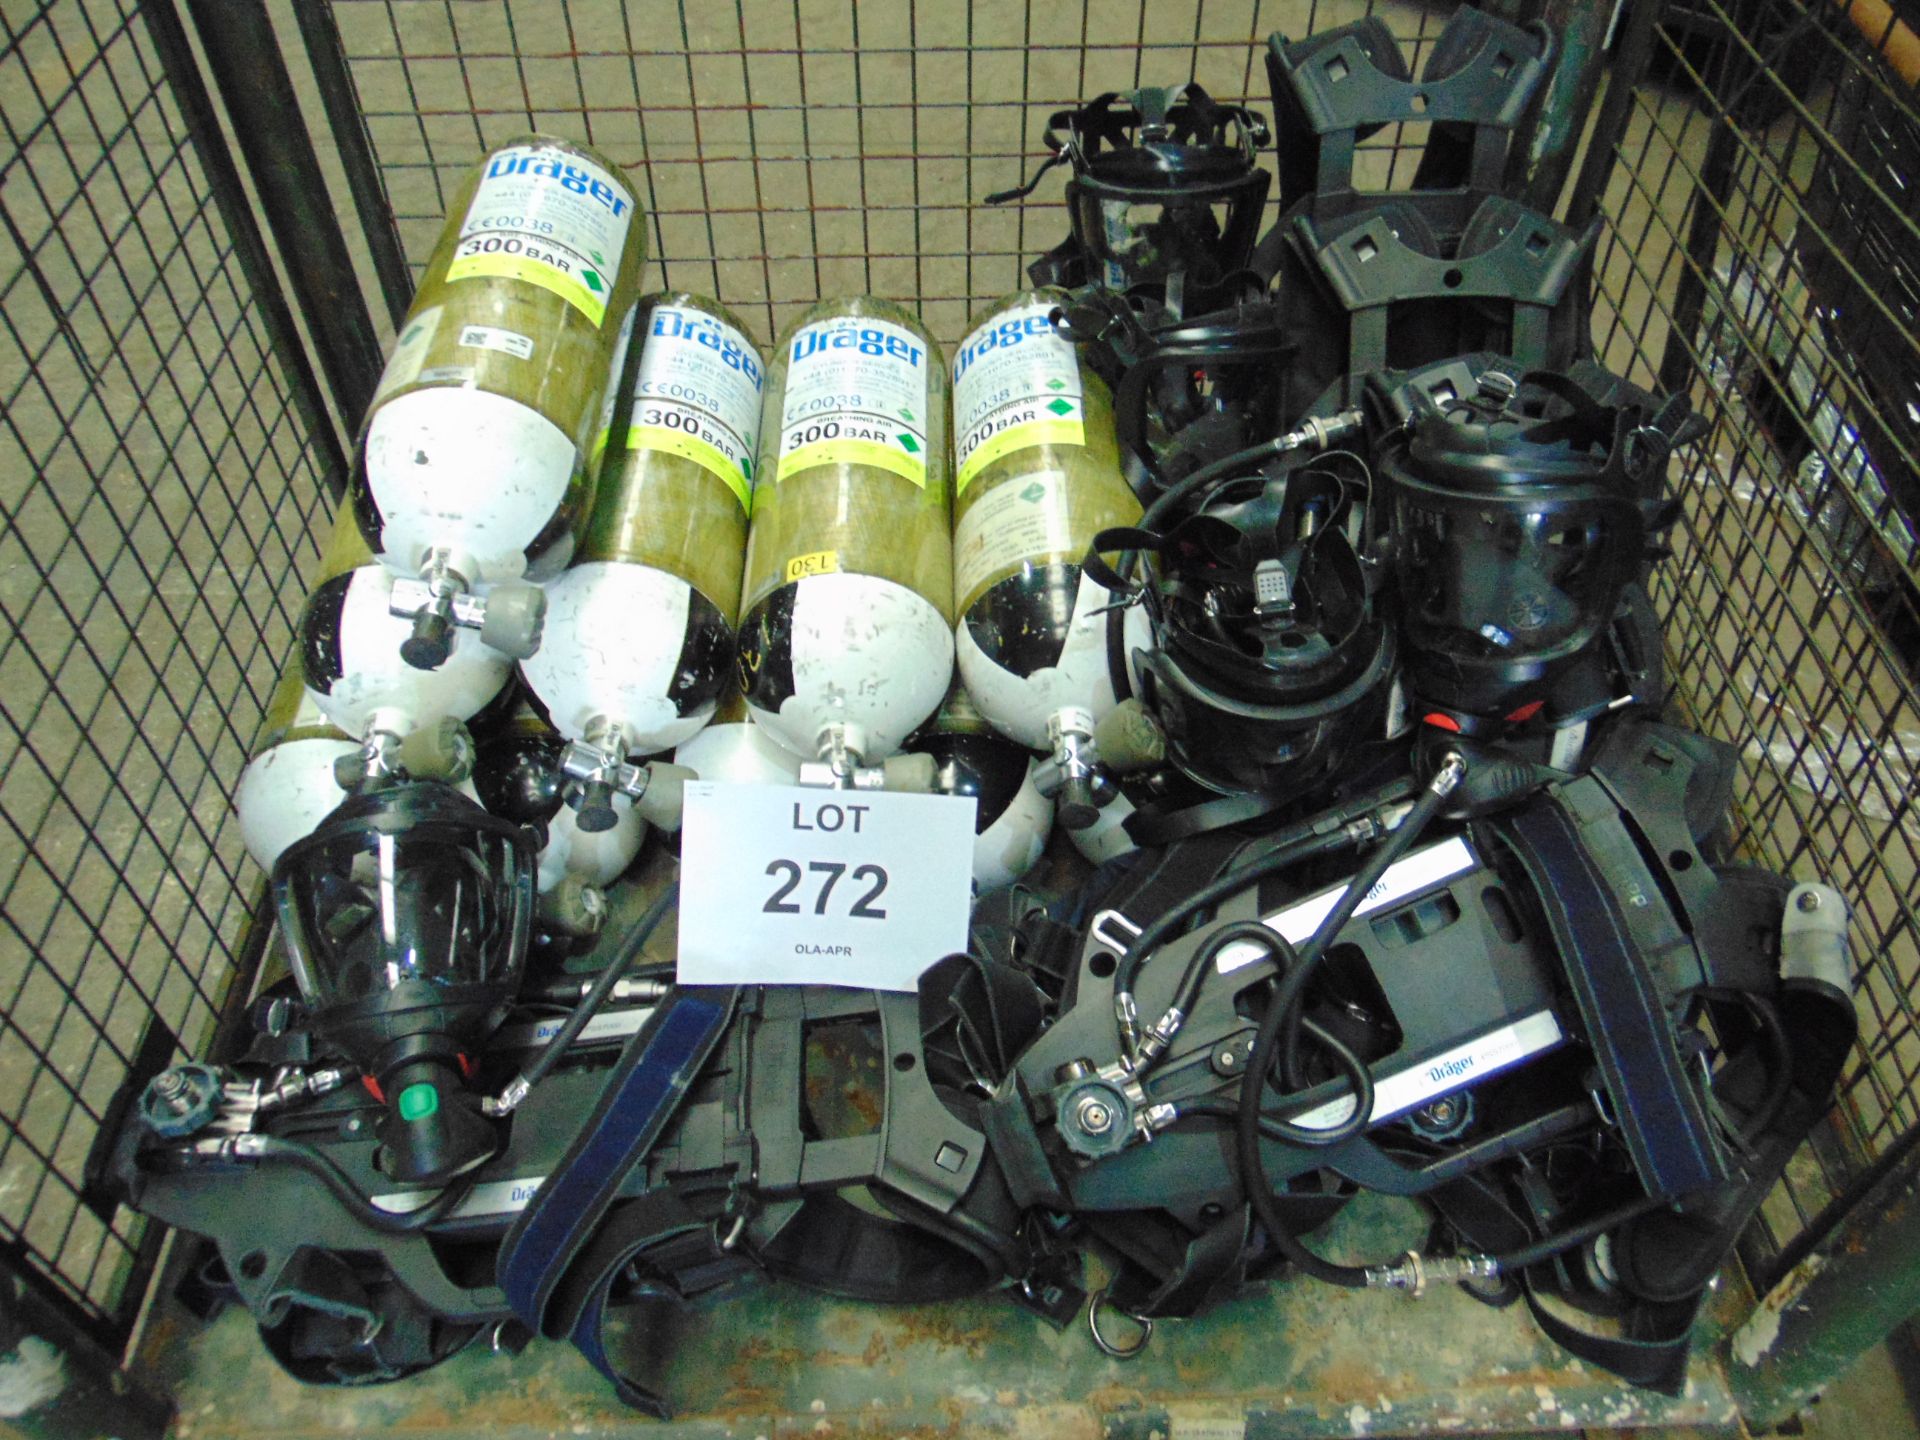 5 x Drager PSS 7000 Self Contained Breathing Apparatus w/ 10 x Drager 300 Bar Air Cylinders - Image 19 of 22